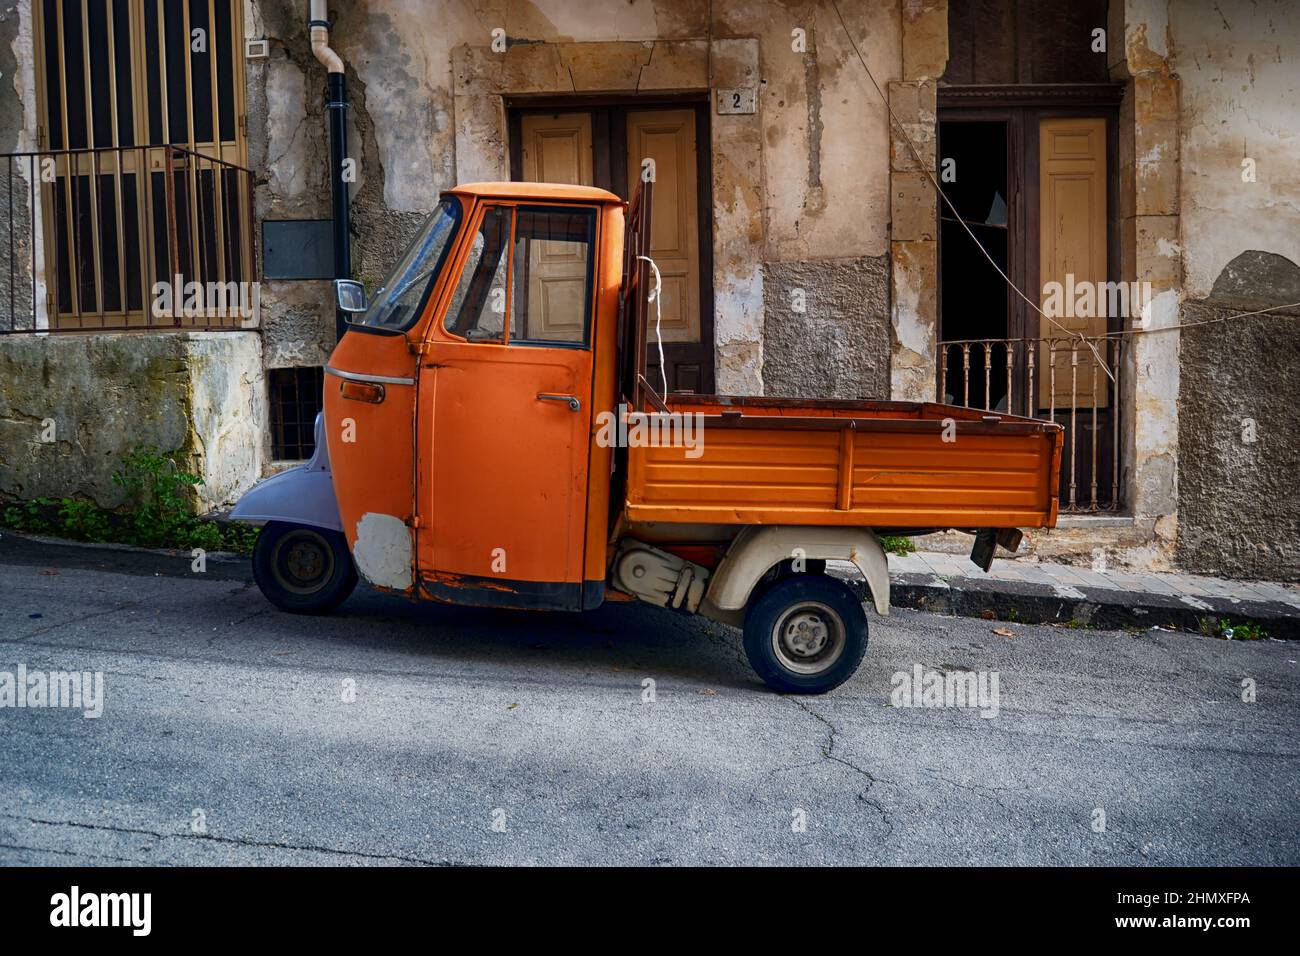 Piaggio Ape 50, a Three-wheeled Light Commercial Vehicle in Italy Editorial  Stock Image - Image of retro, motor: 219982254